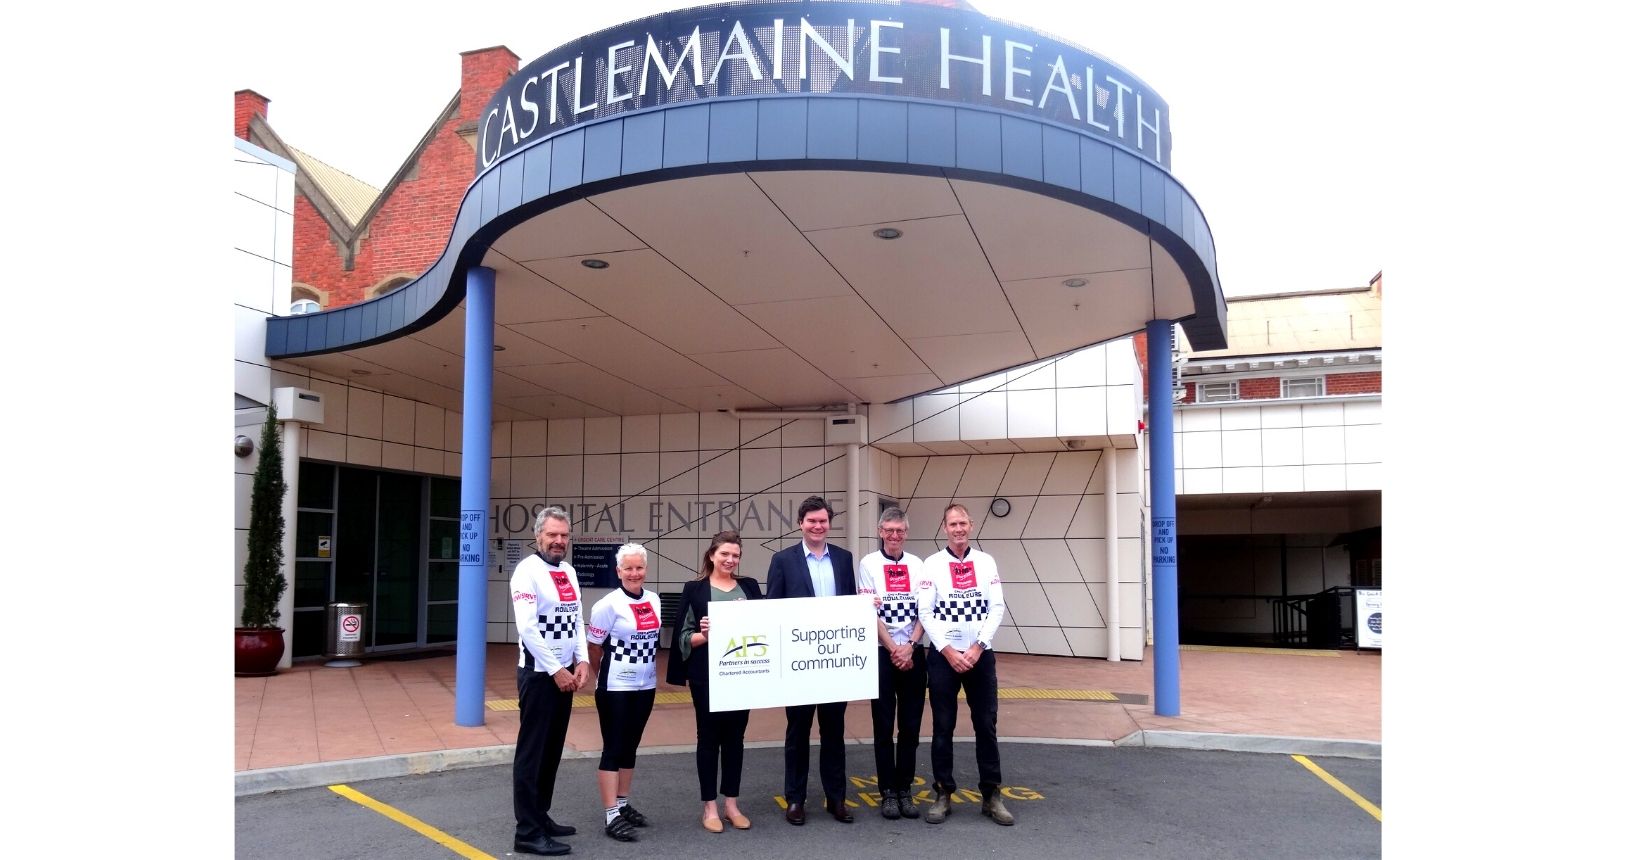 Castlemaine health donation afs